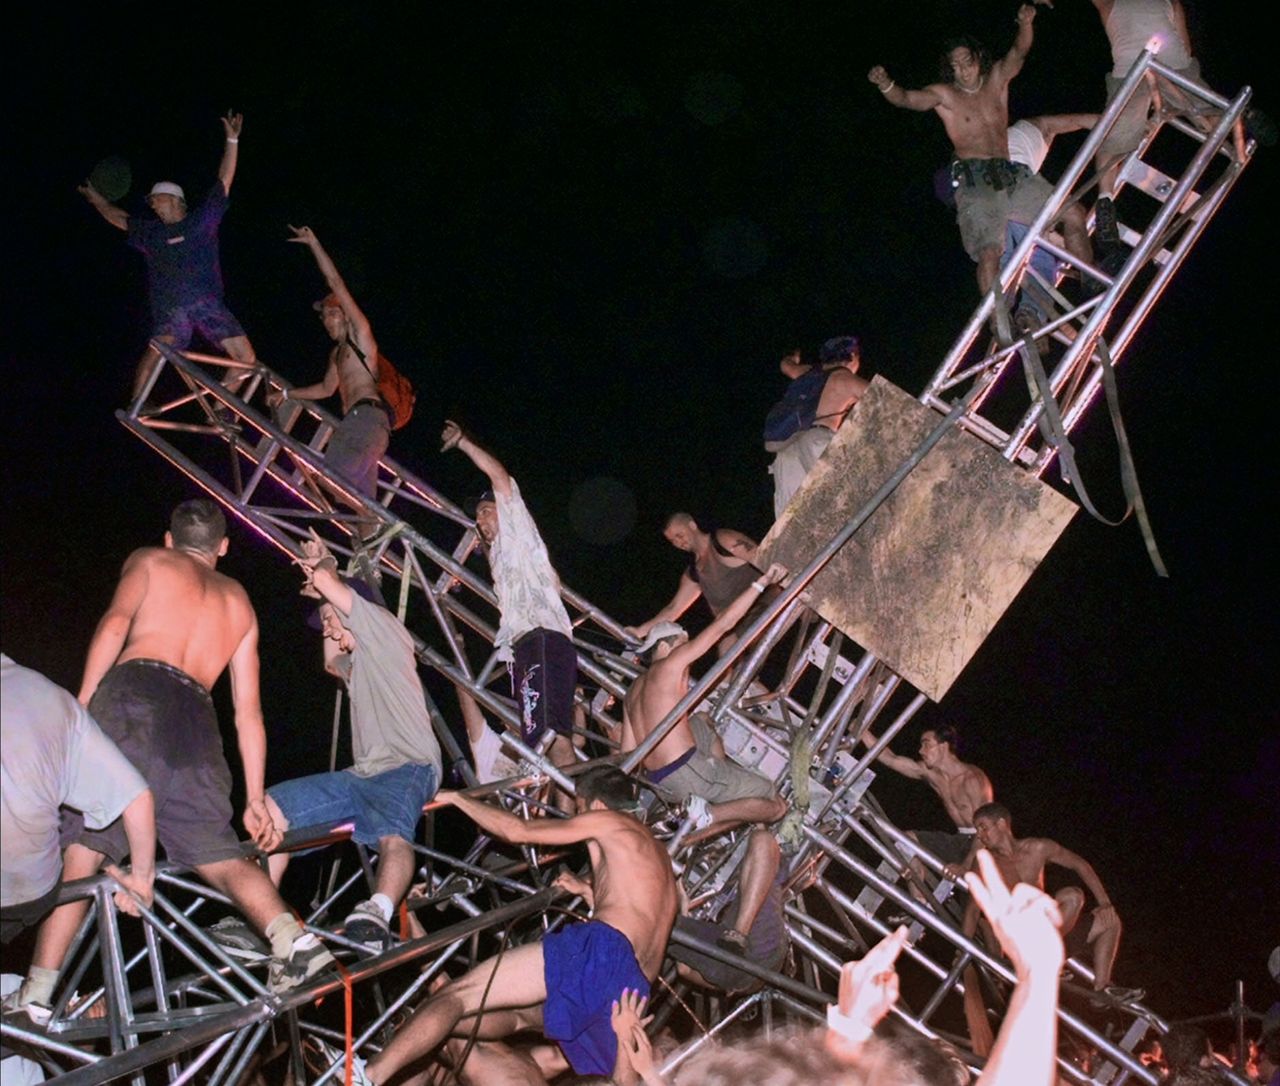 A group of young men climb to the top of a sound tower and knock it down in footage from the music festival shown in "Trainwreck: Woodstock '99."